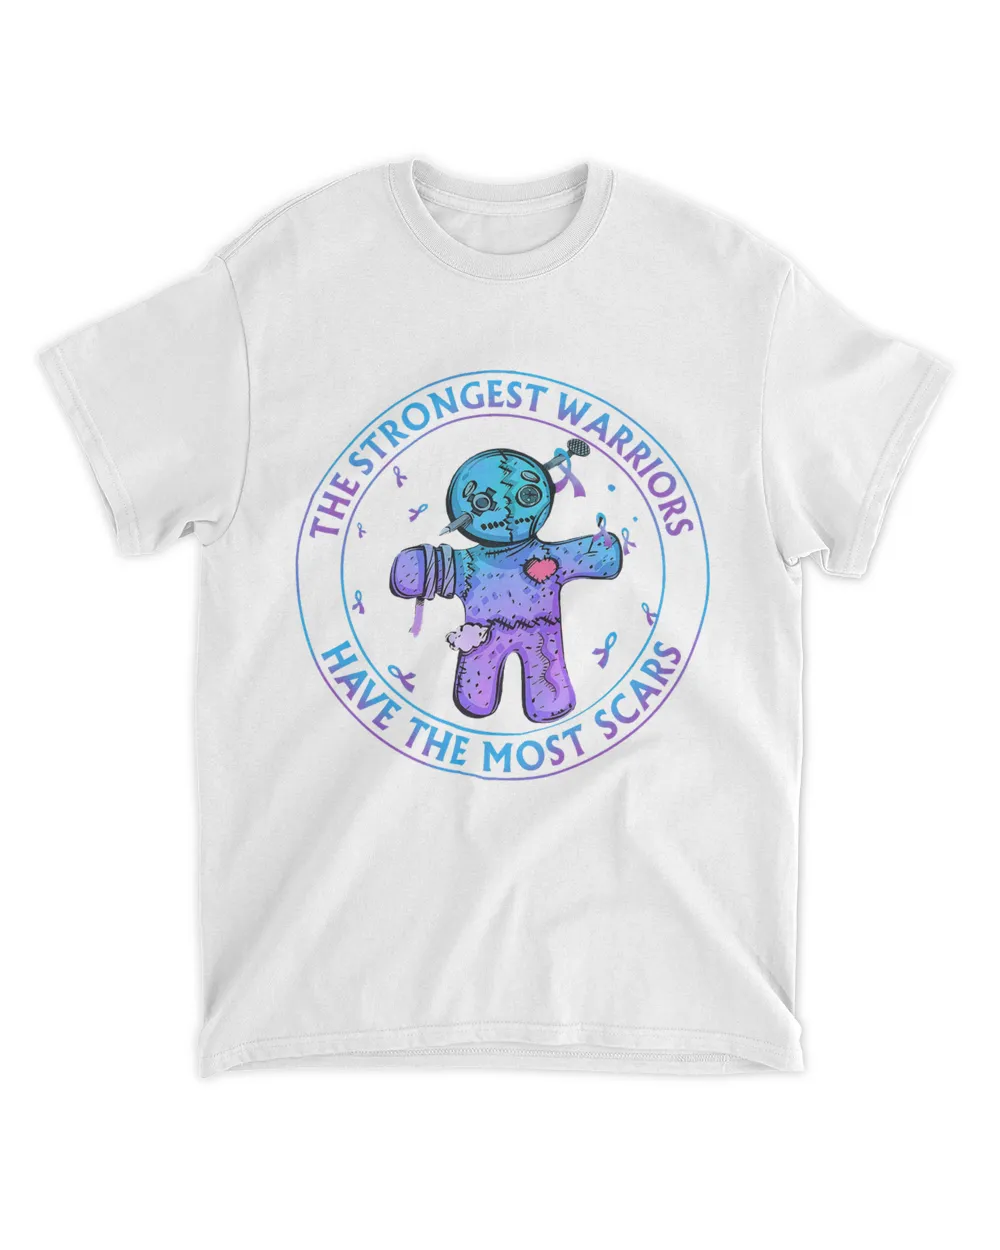 The Strongest Warriors Have The Most Scars Voodoo Doll Shirt